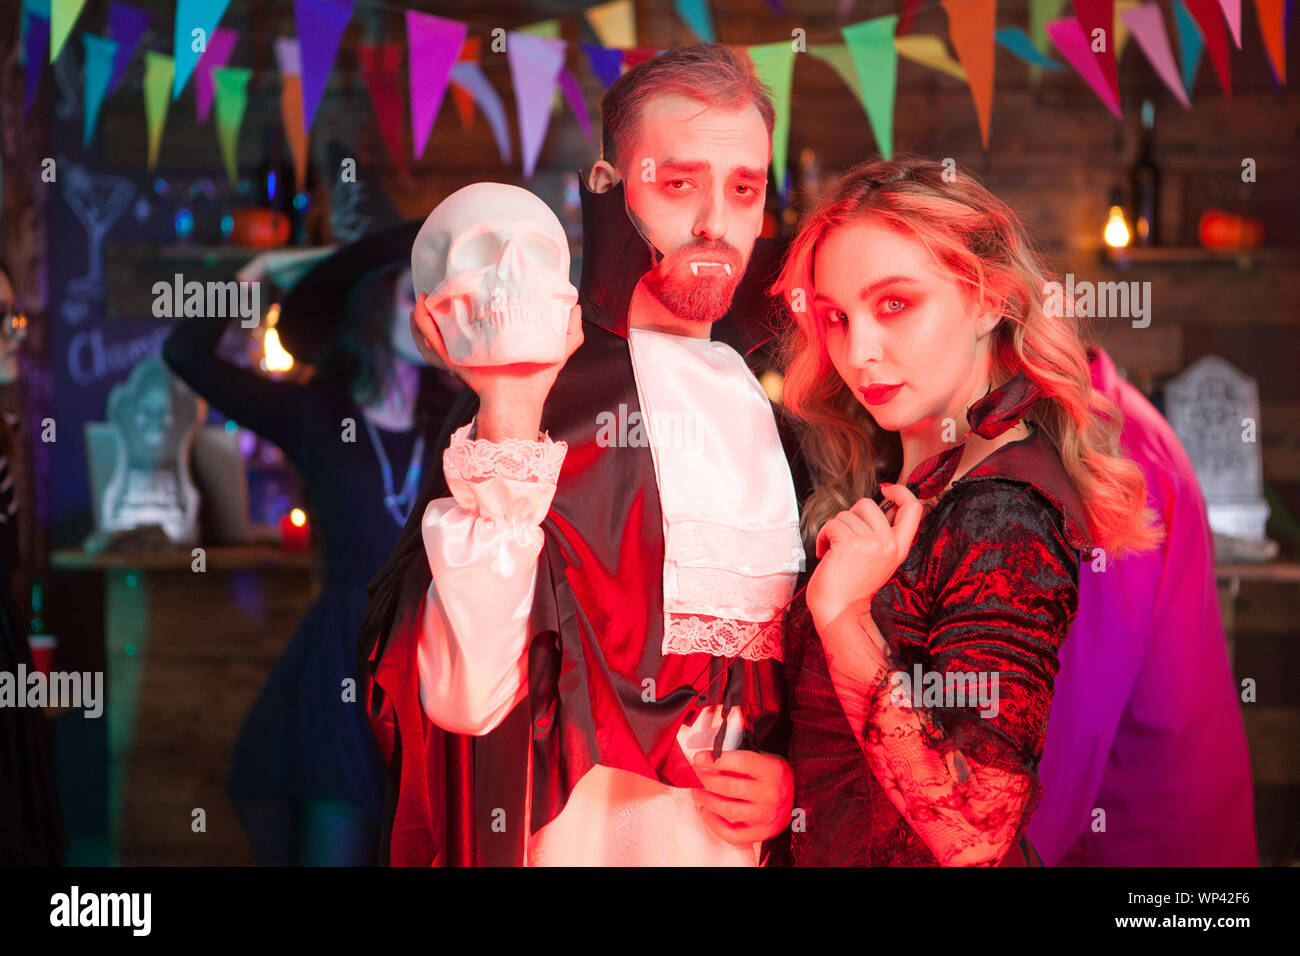 Portarit of good friends dressed up for halloween celebration. Man in Dracula costume. Stock Photo